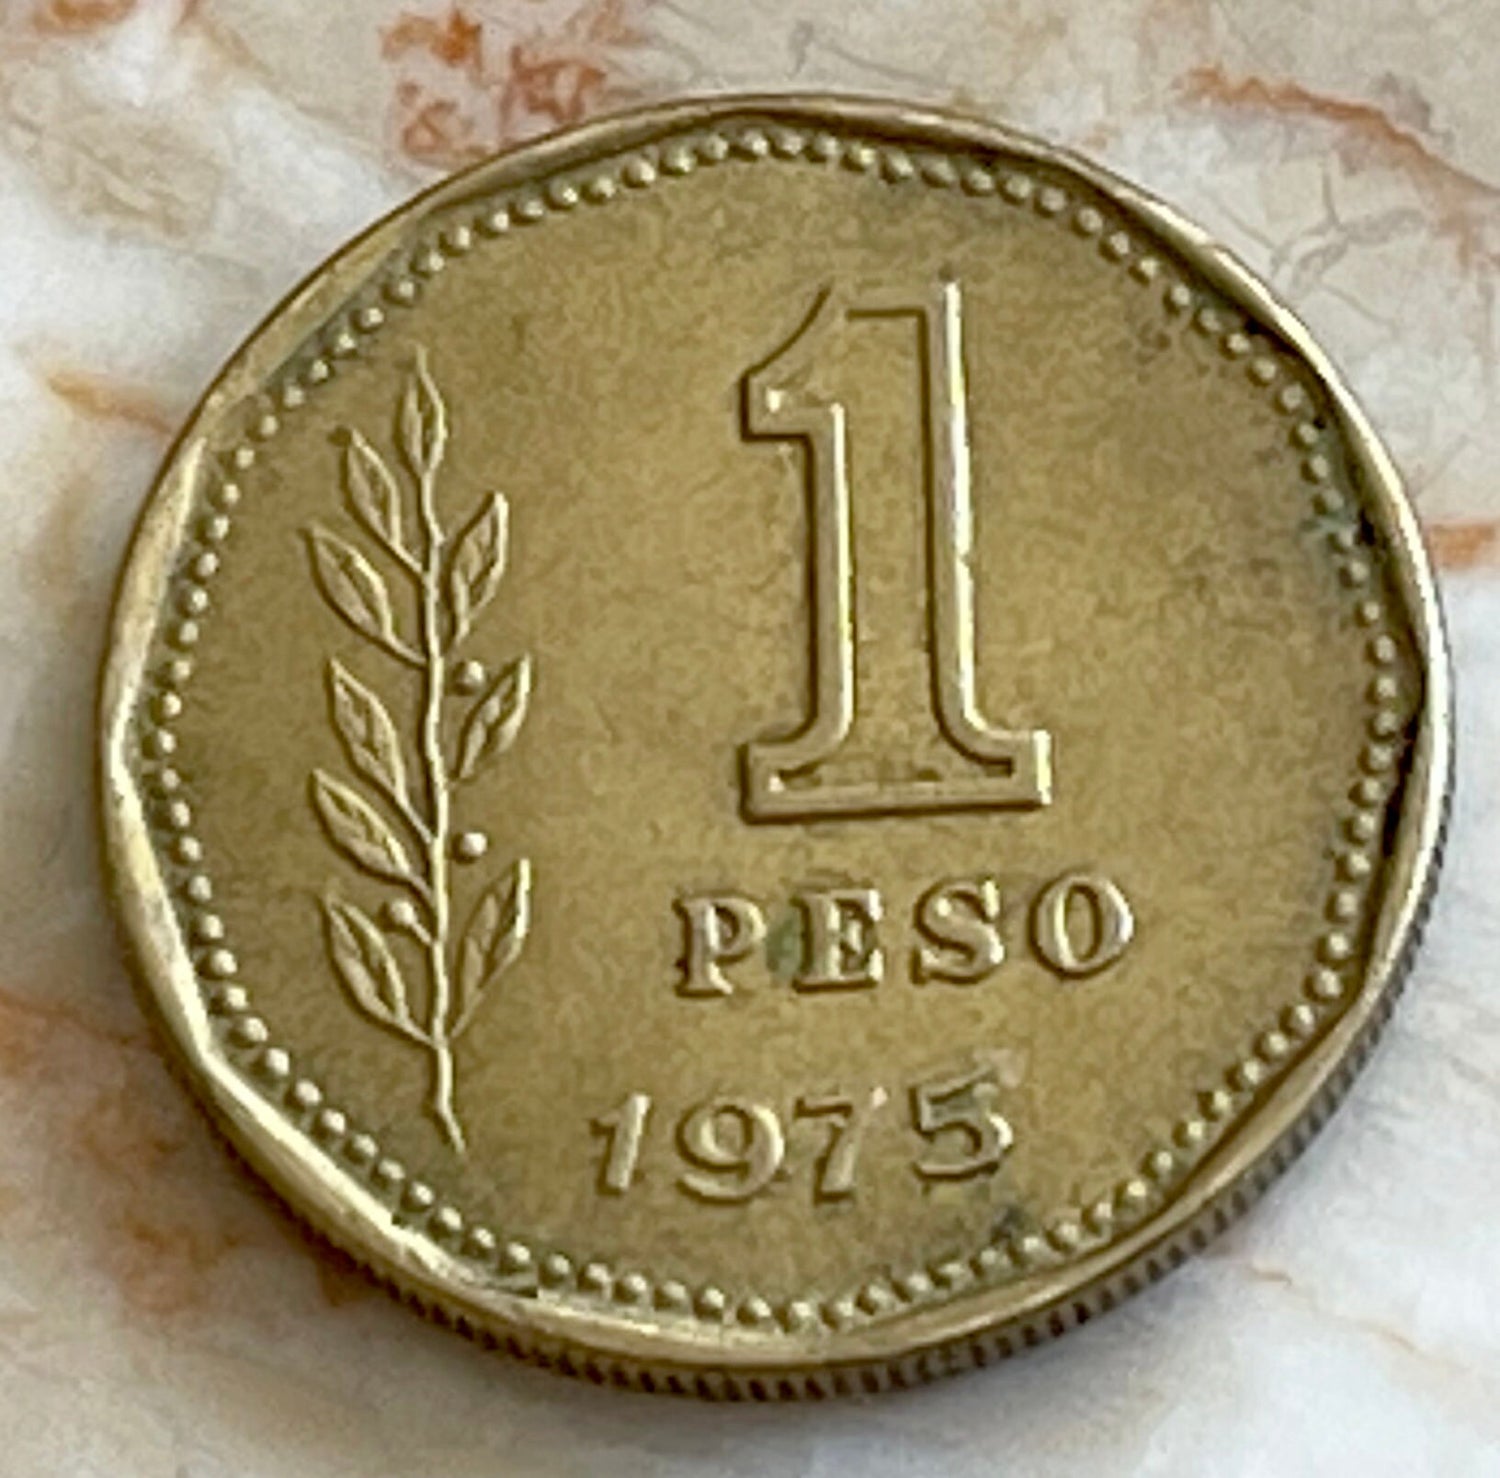 Sun of May Argentina Authentic Peso Coin Money for Jewelry and Craft Making 1974 1975 1976